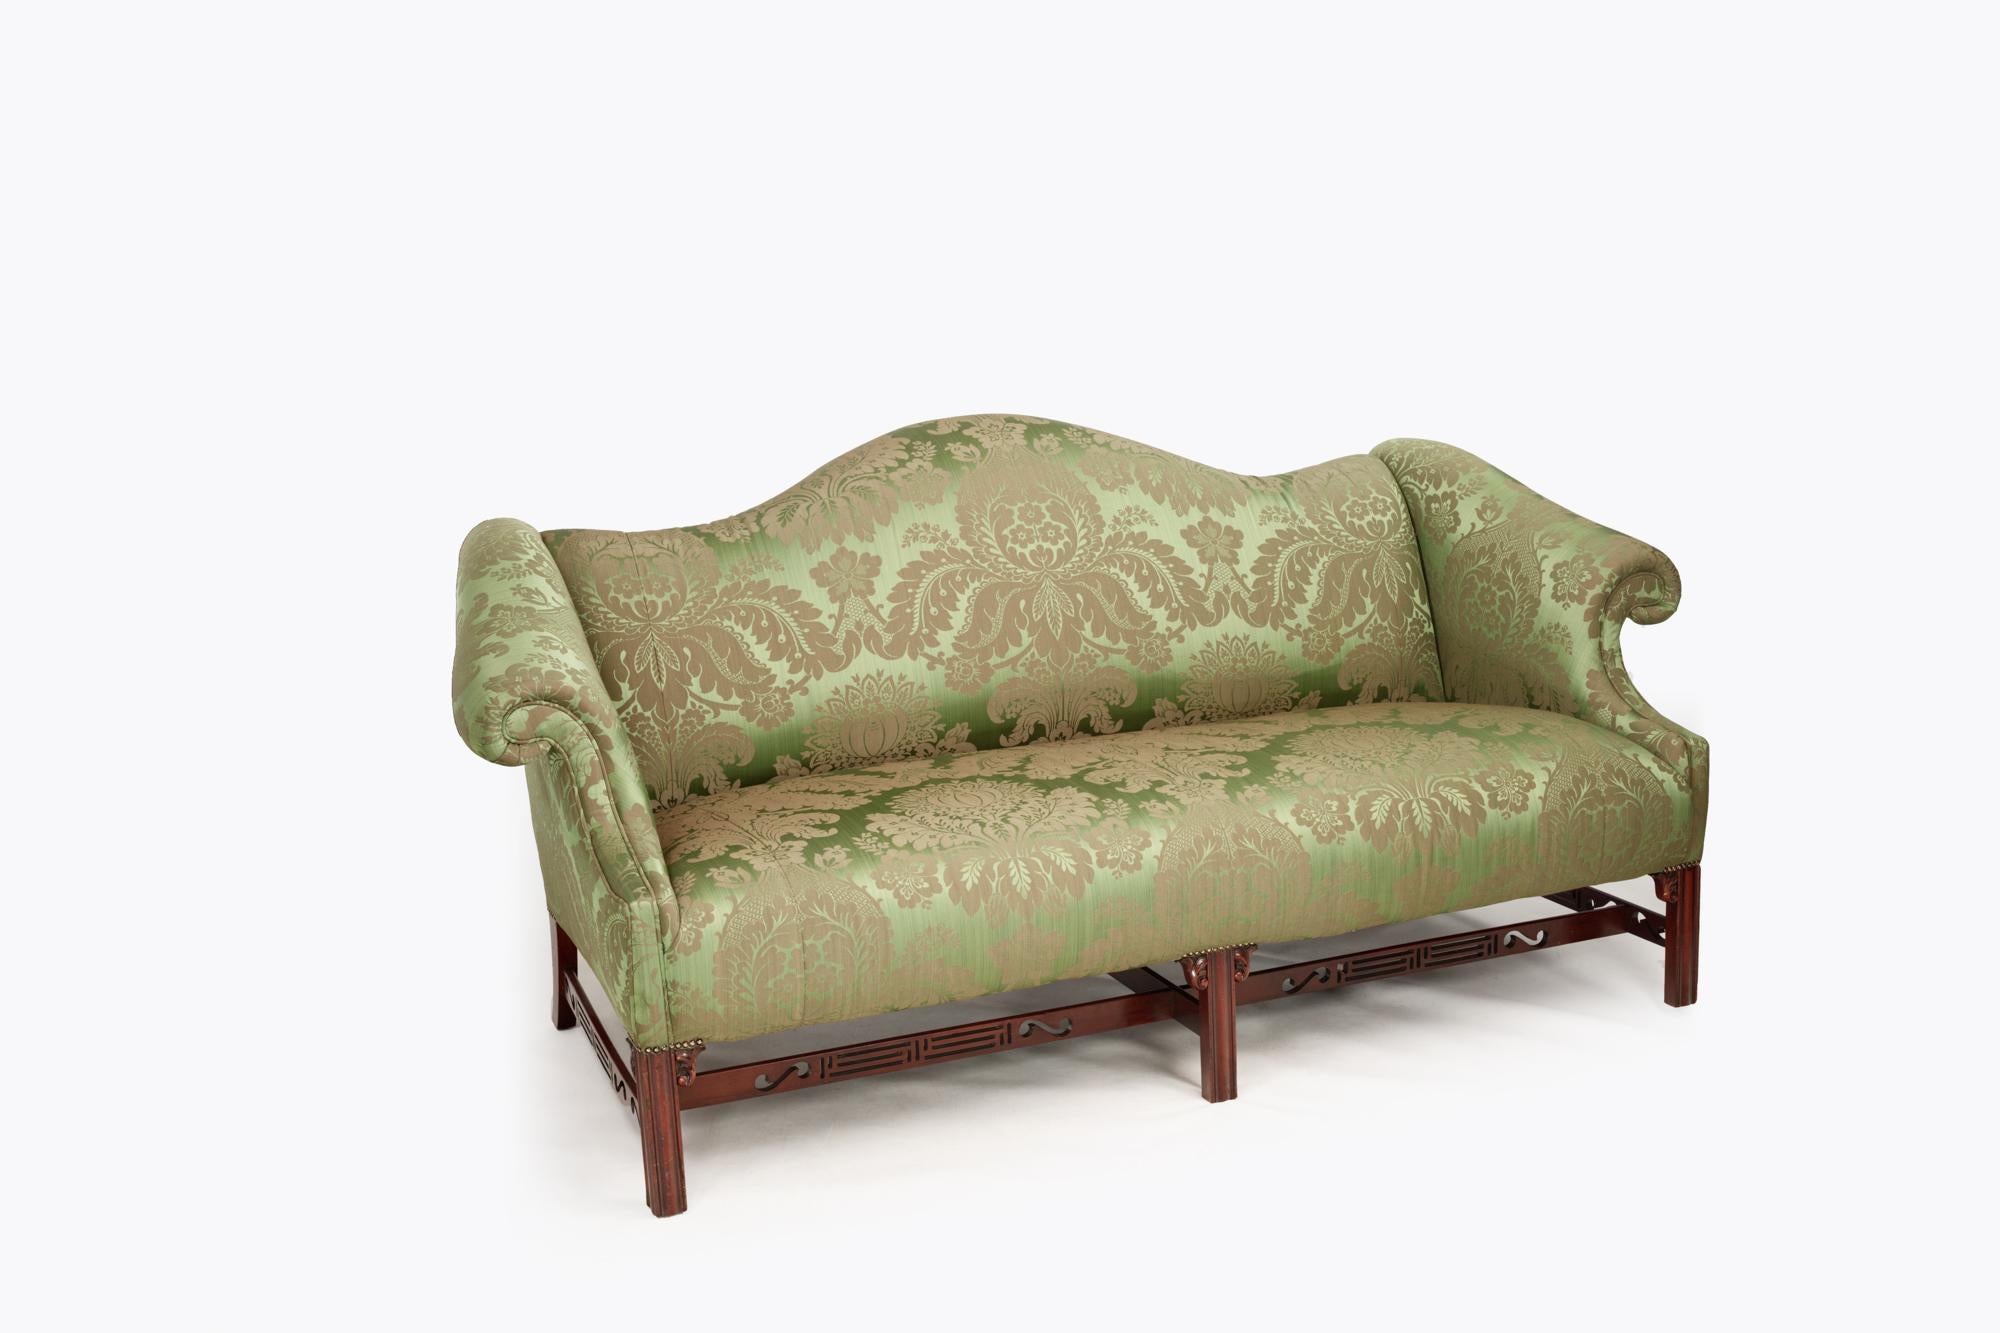 Early 19th Century George III Gainsborough camelback sofa with scrolled arms, raised over six moulded marlborough legs supported by distinctive pierced stretchers which incorporate shaped corner brackets. This piece has been newly upholstered in